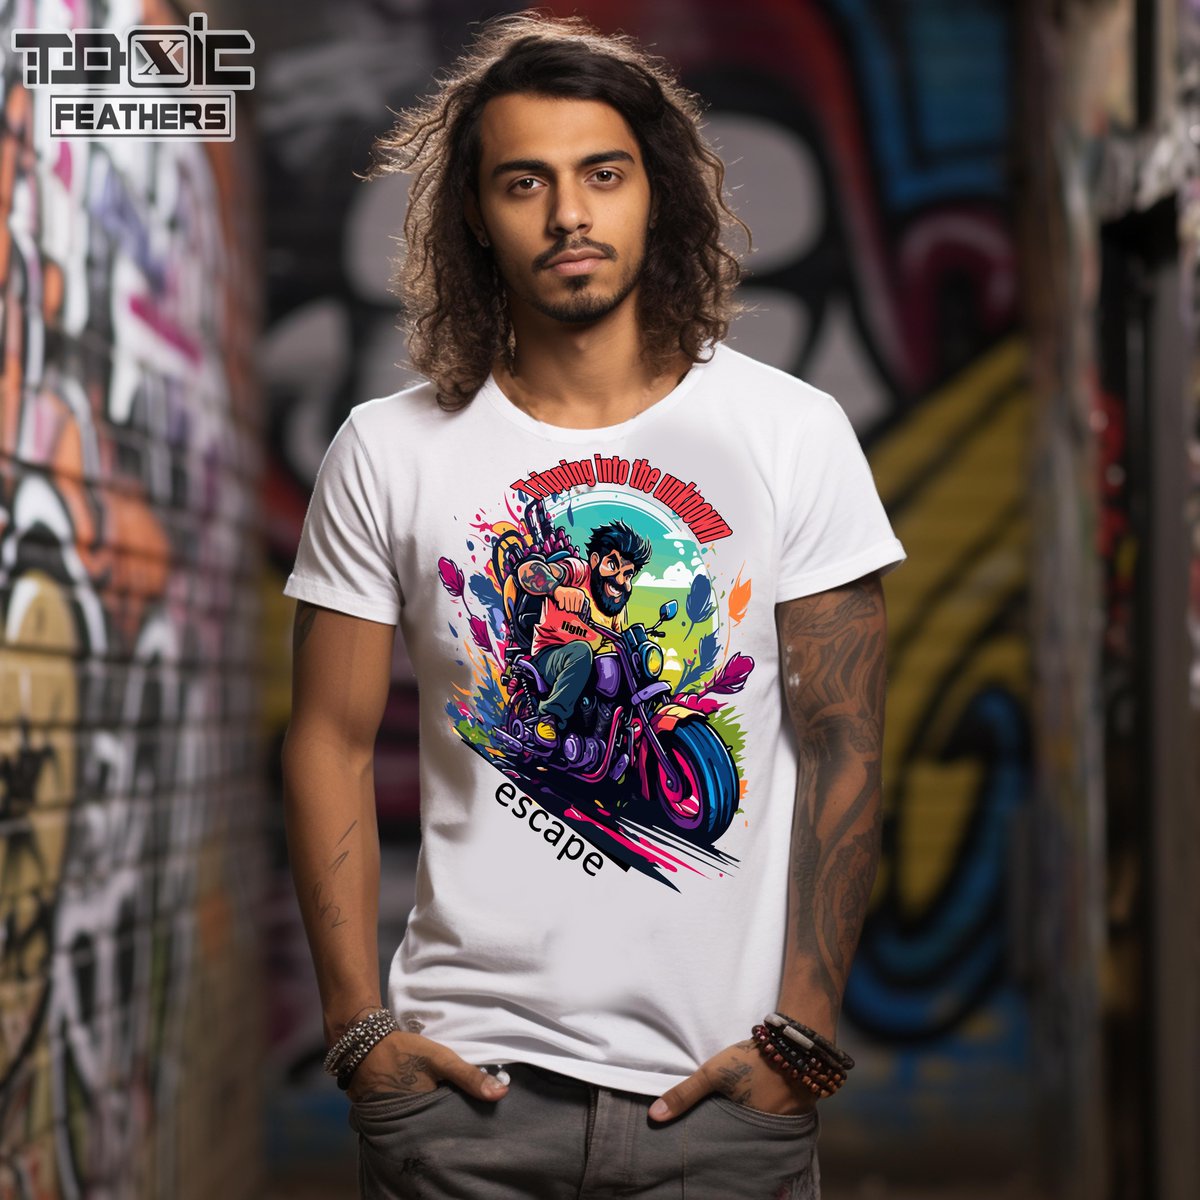 Cyber Space!

Priced at ₹999 under the categories “Black Mirror” and “Urban Sanskrithi'. Available in Black and all sizes, oversized and regular.

#ToxicFeathers #UrbanSanskrithi #BlackMirror #streetwear #Streetfashion #TshirtFashion #ClothingBrand #FashionistaStyle #OOTD